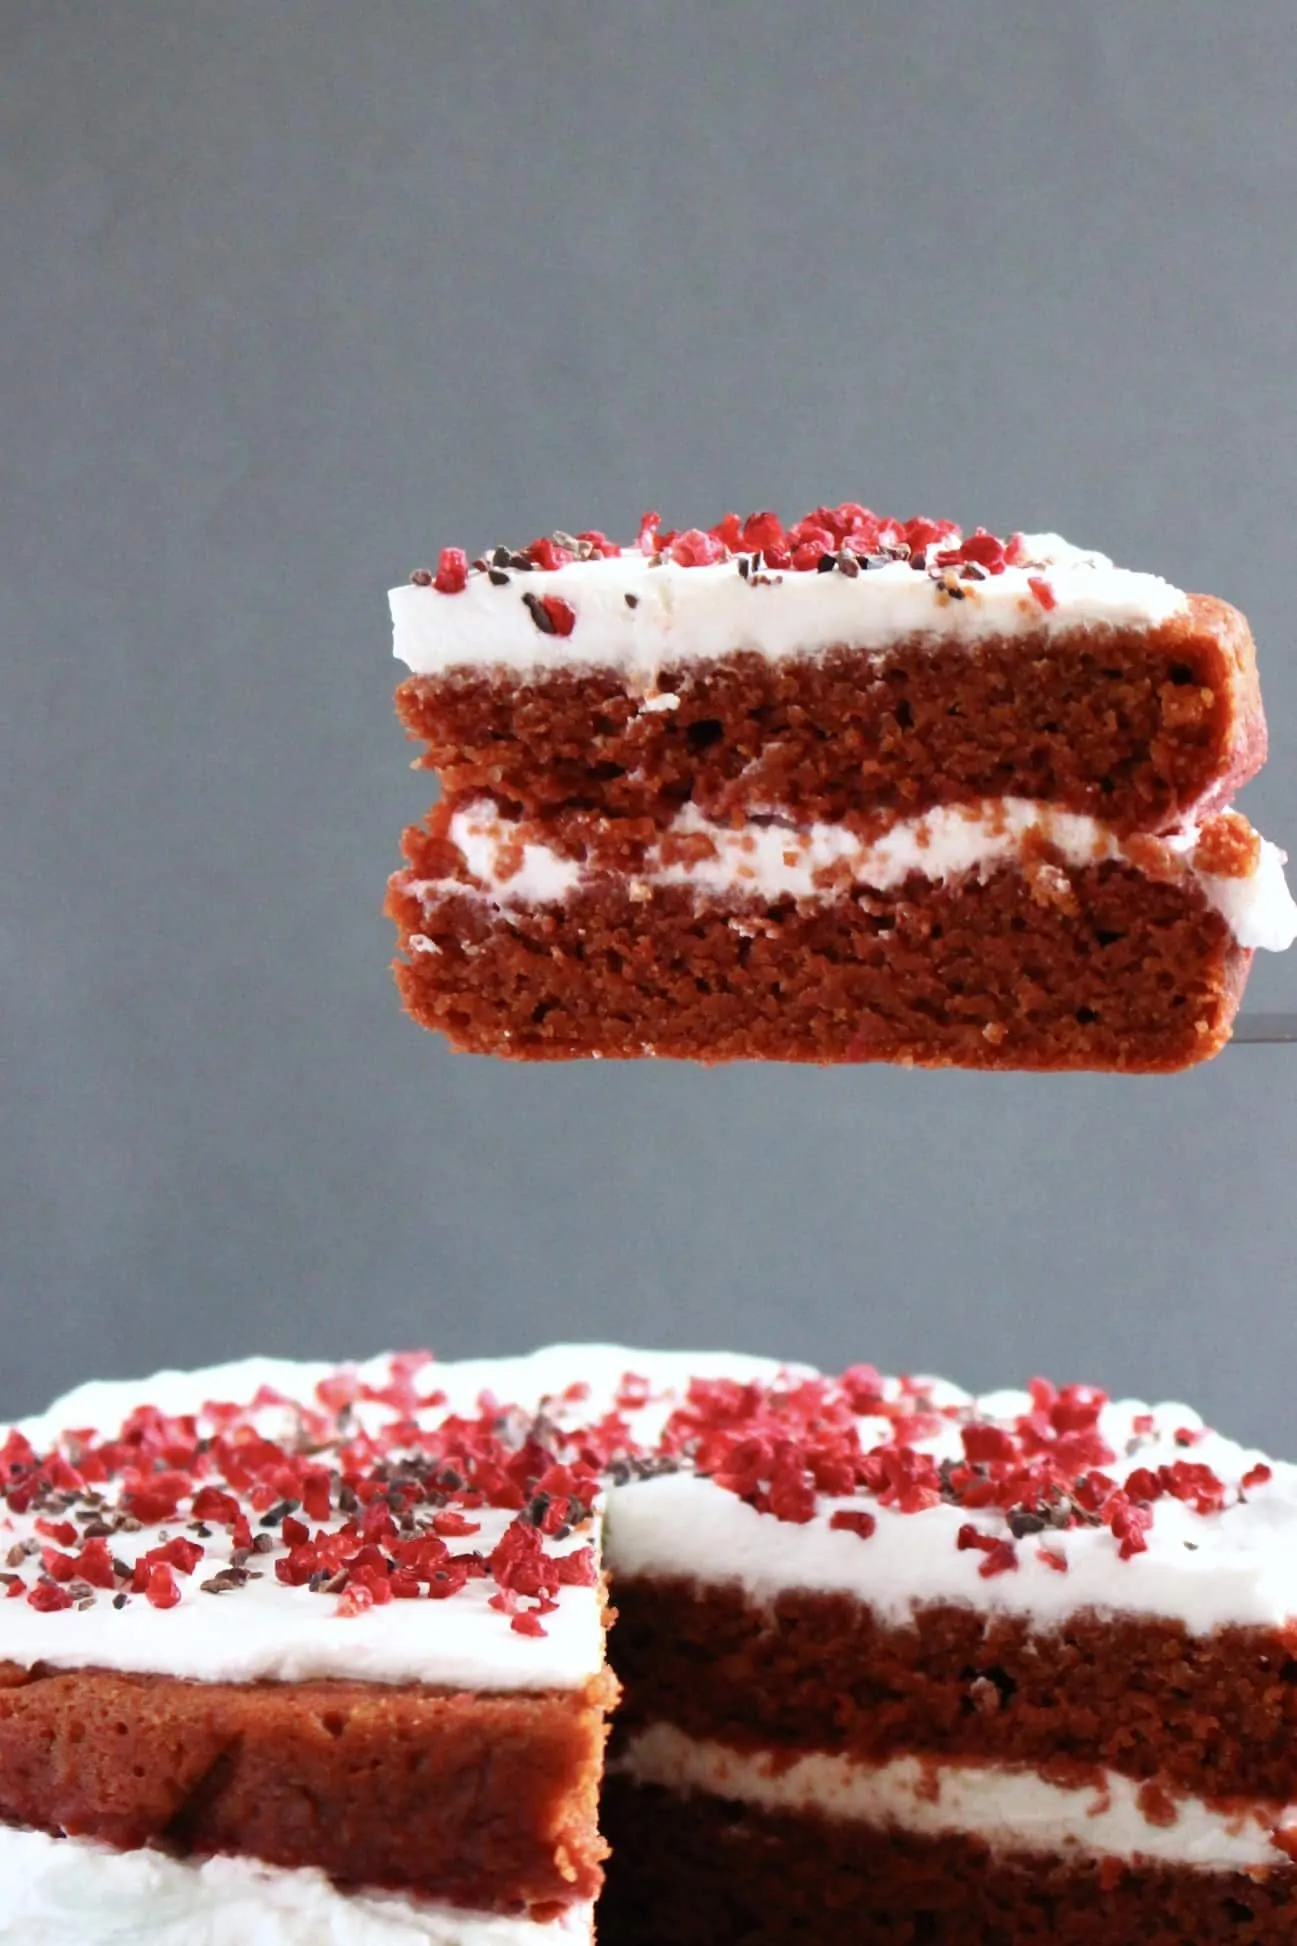 Red velvet cake with a slice being lifted up